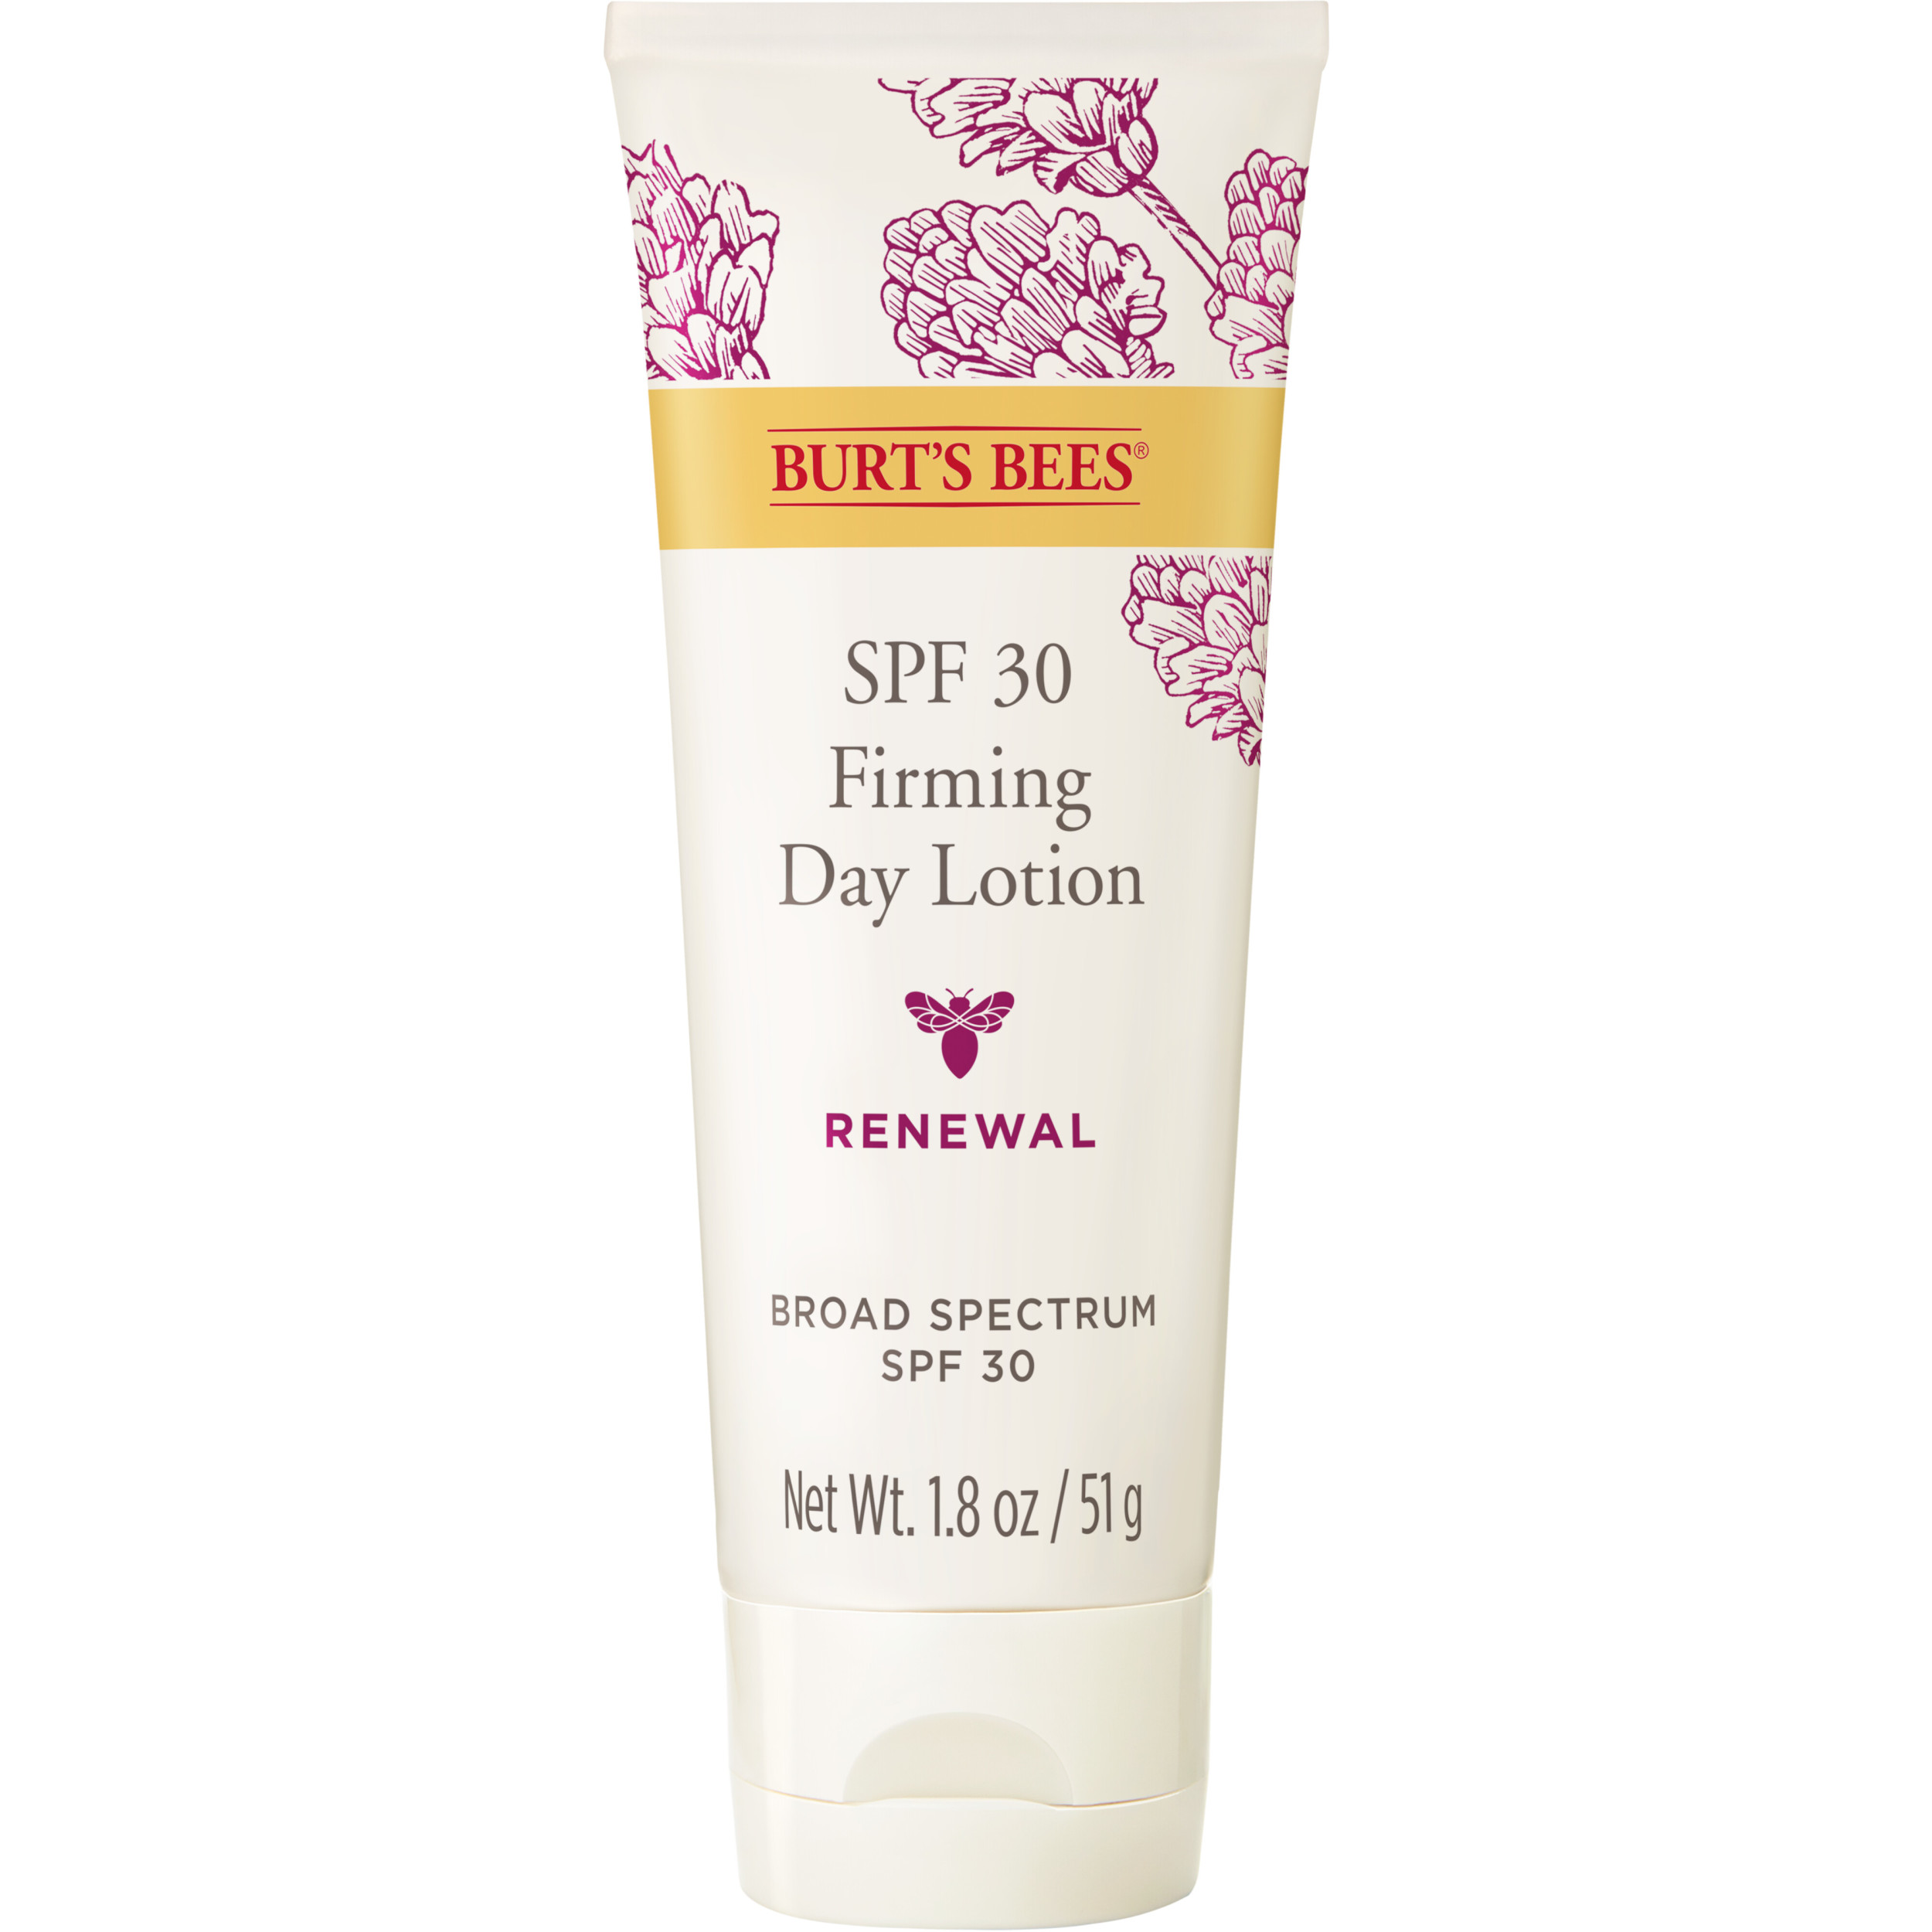 Burt's Bees Renewal Firming Day Lotion, SPF 30, 1.8 oz - image 4 of 10